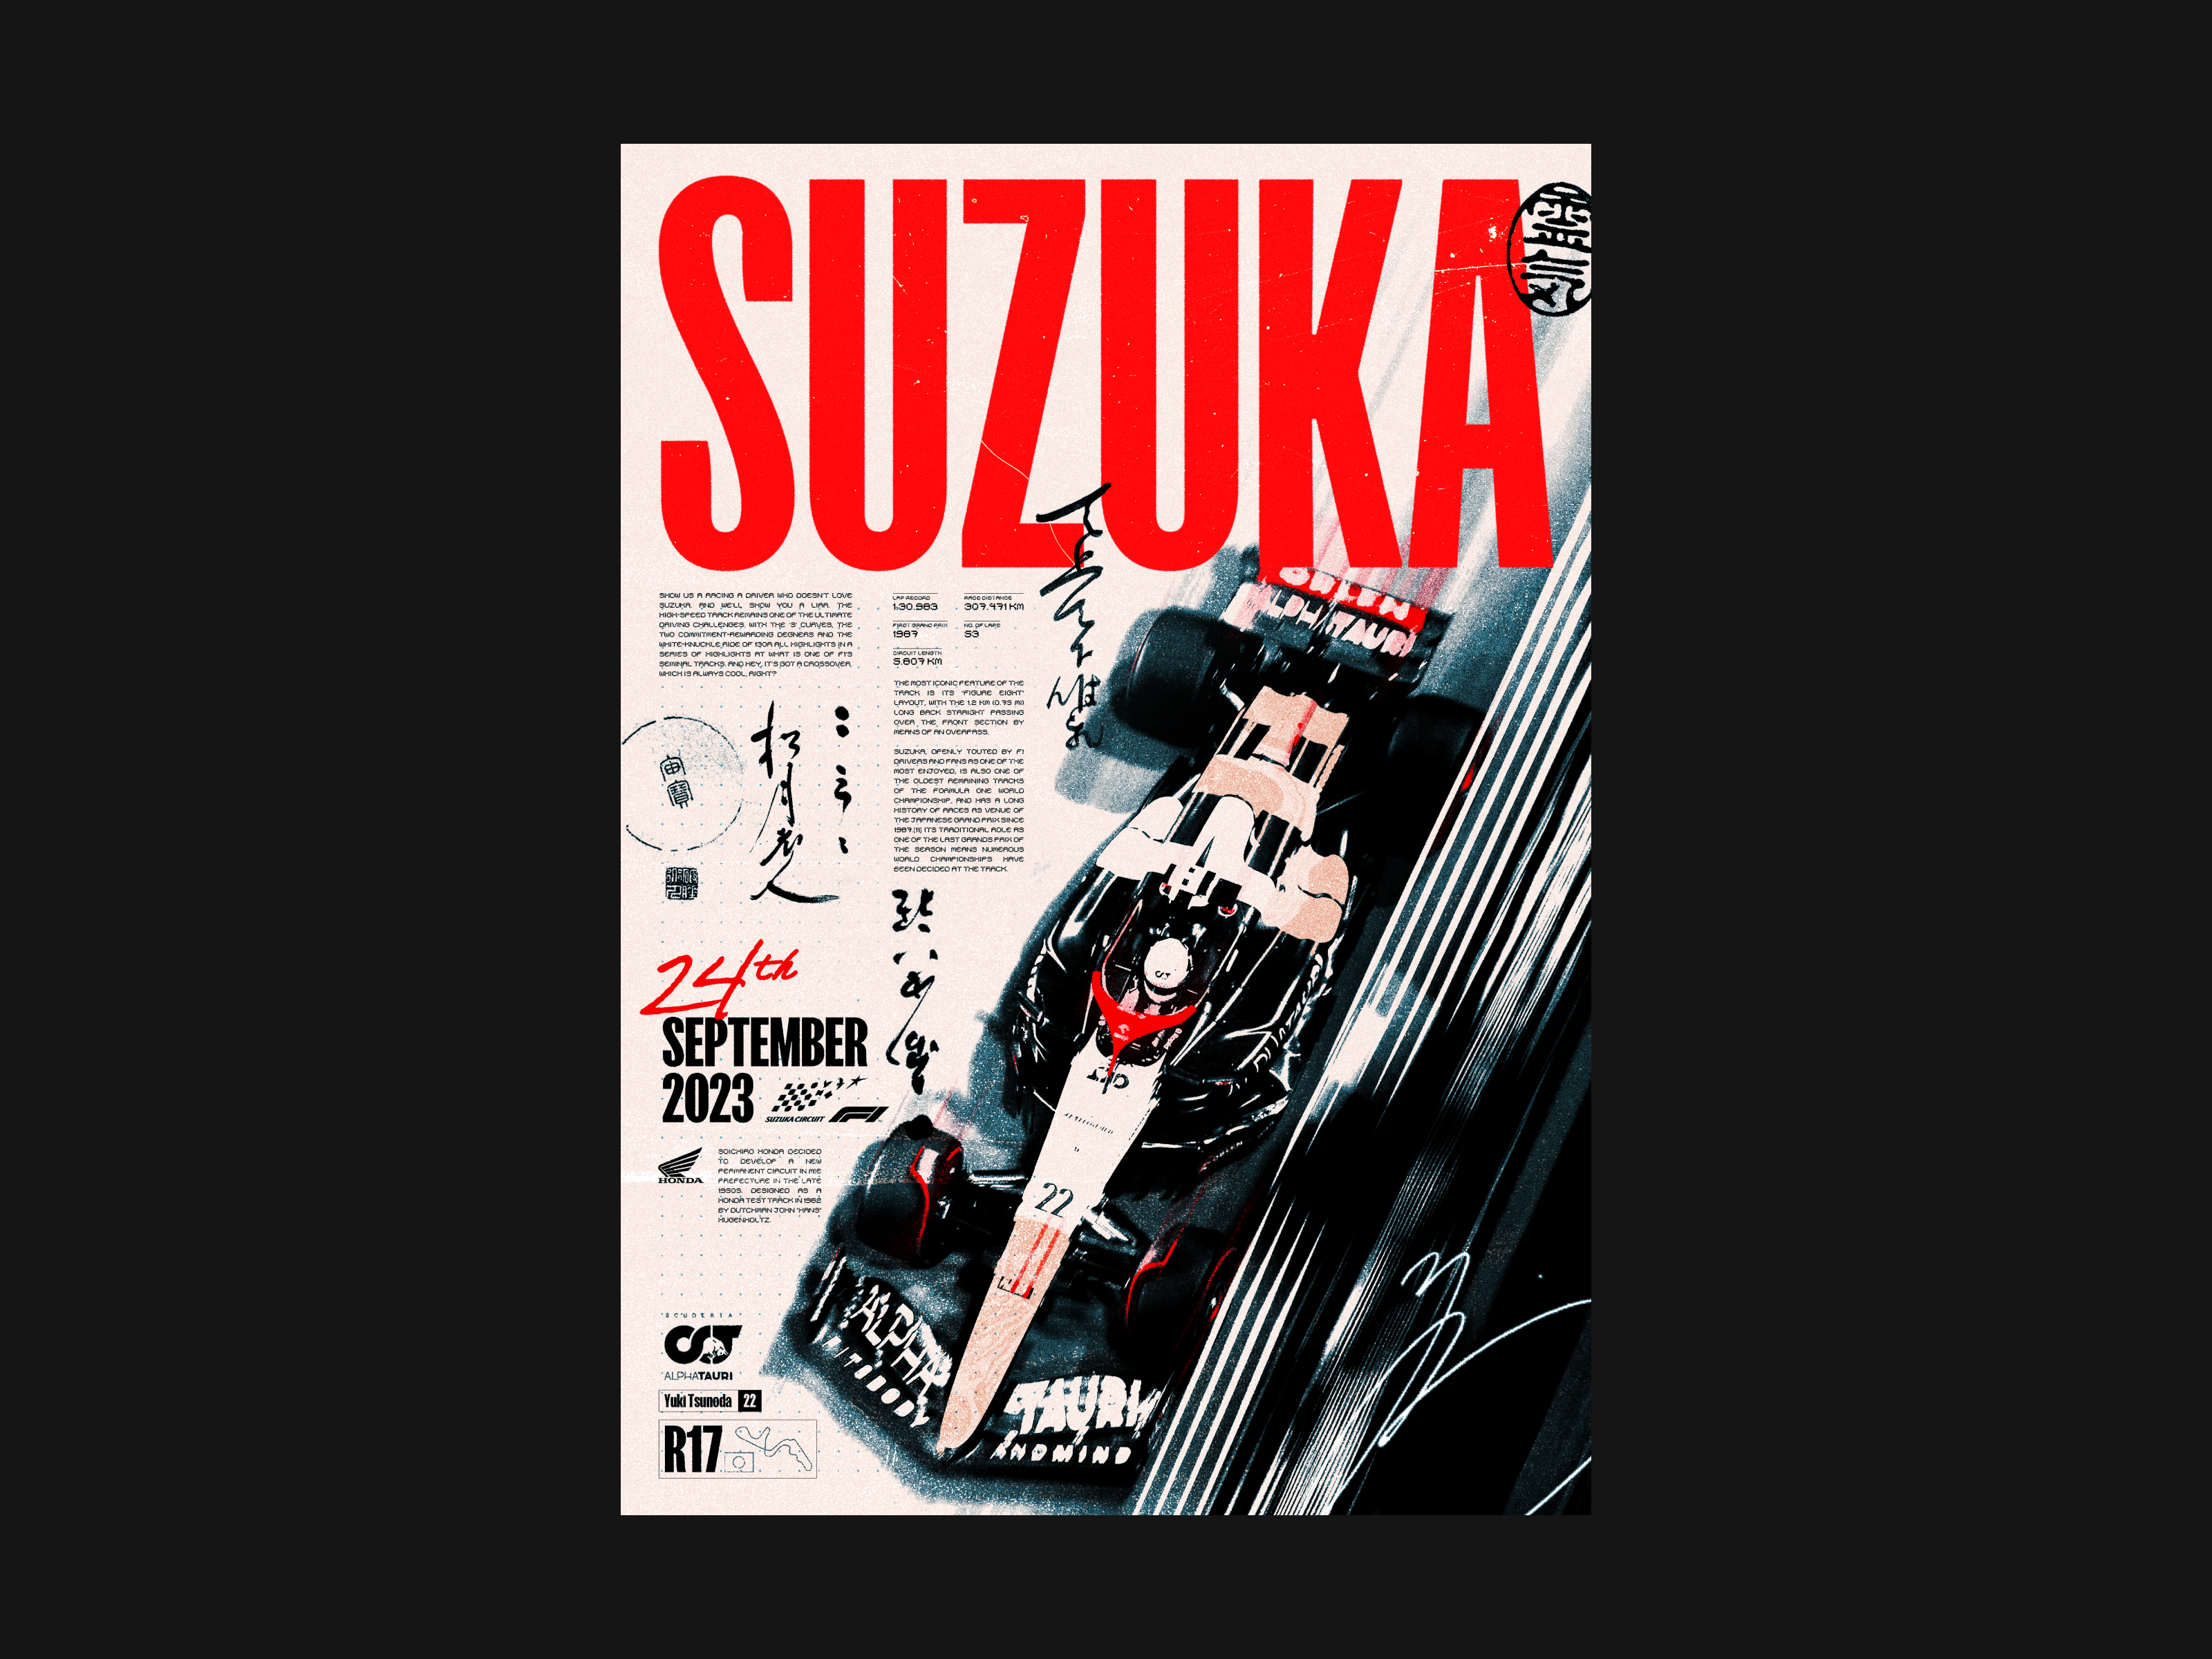 Suzuka Grand Prix Poster by Andy Norman on Dribbble